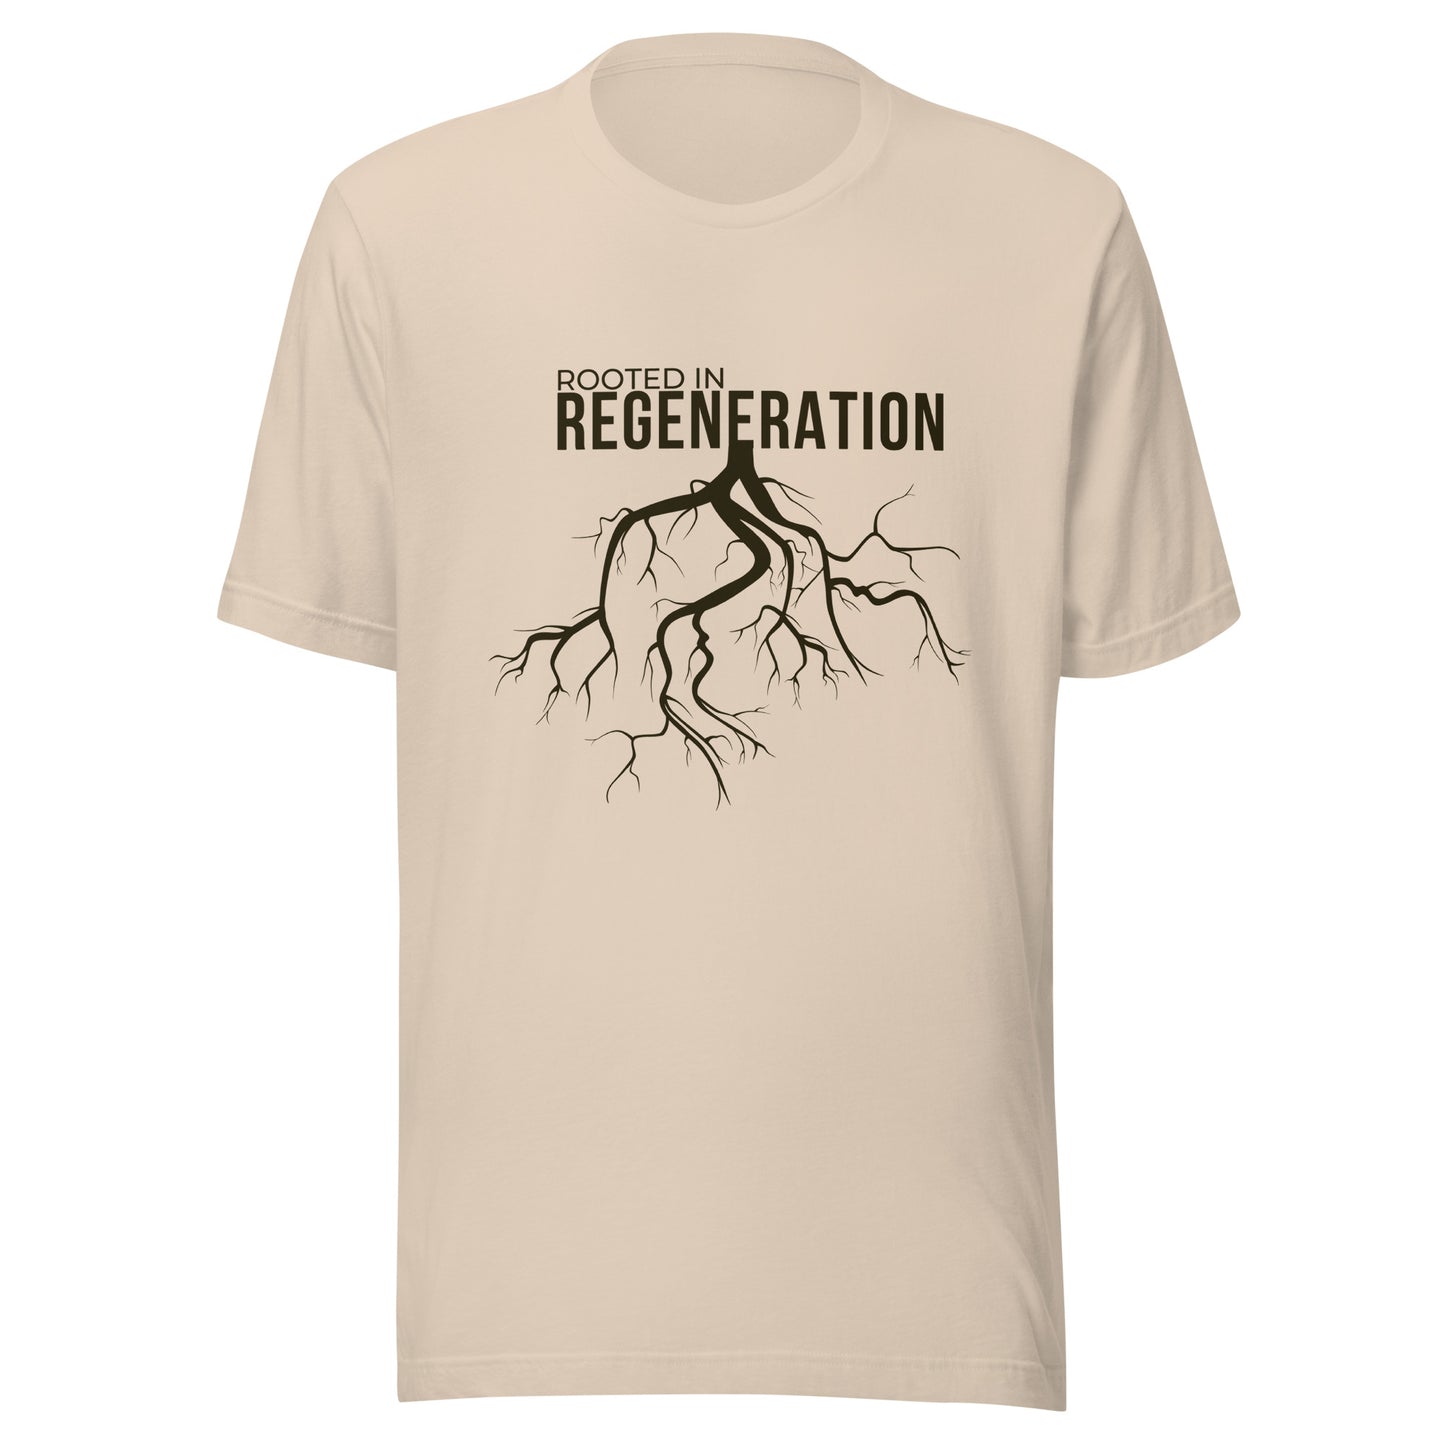 Rooted in Regeneration - Roots T-Shirt